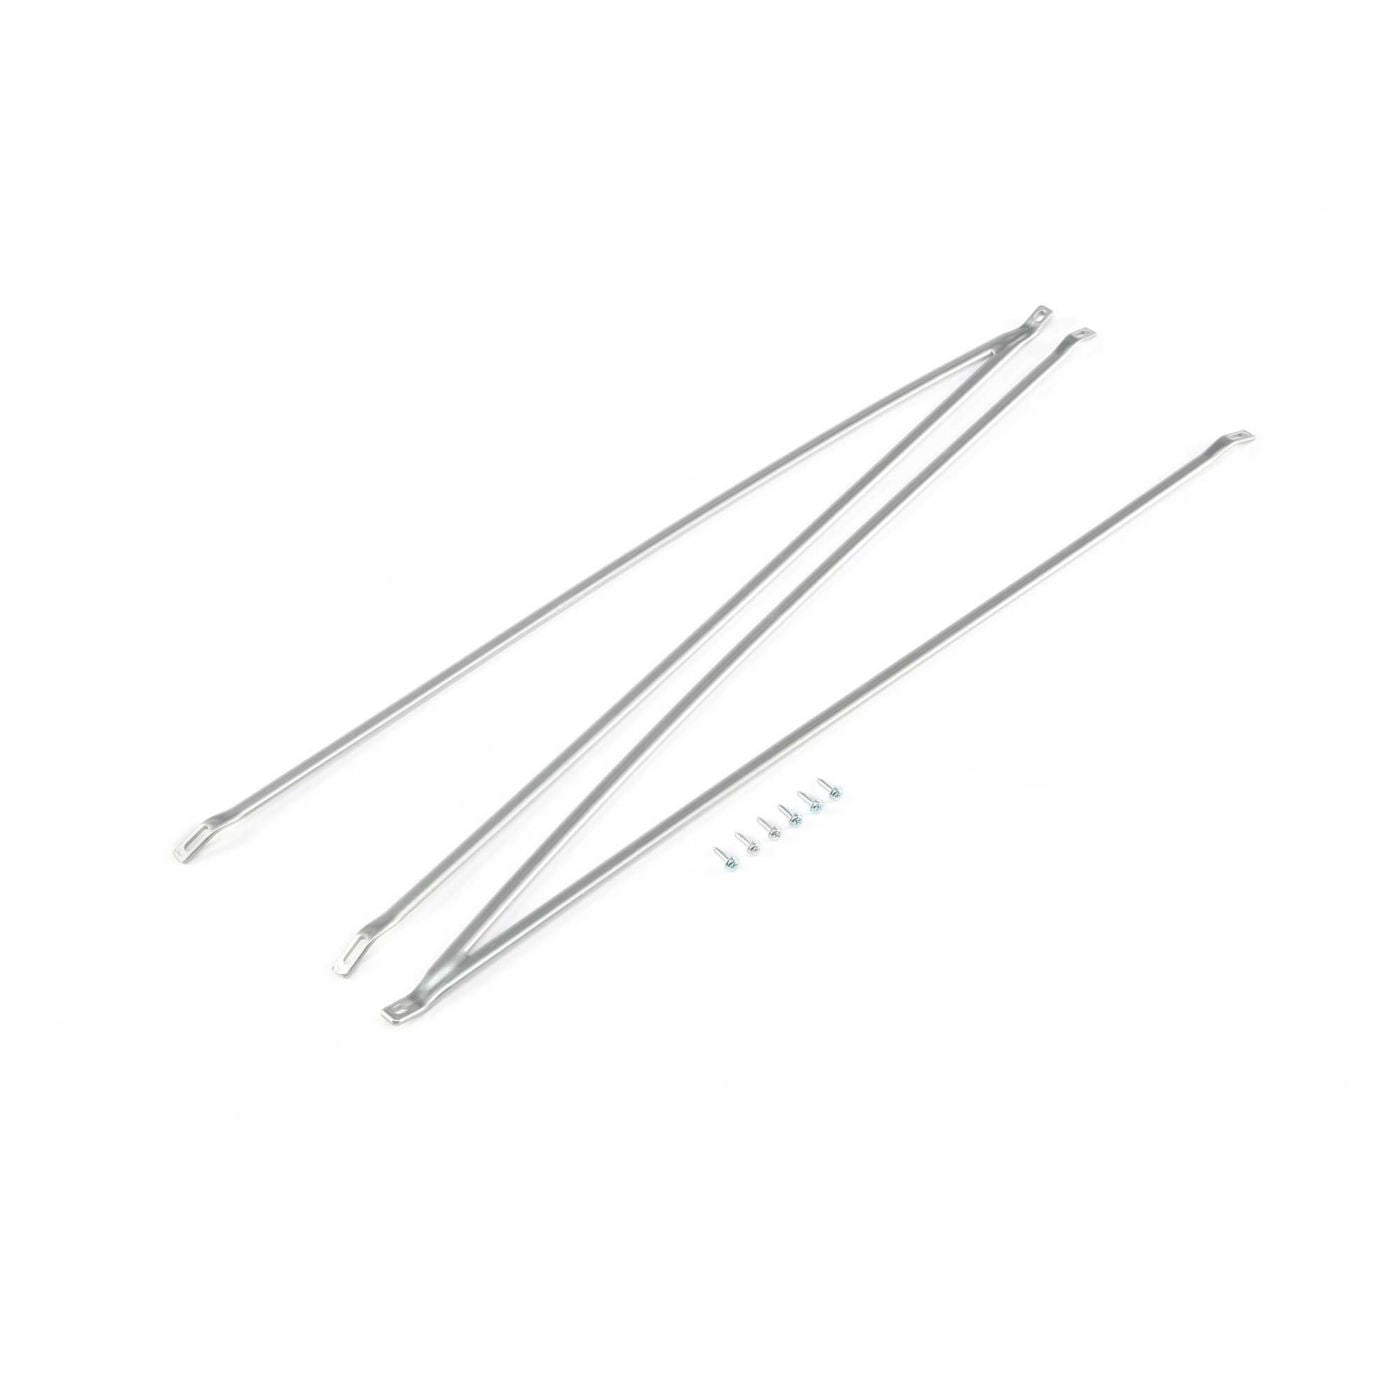 Hobbyzone Wing Struts For Carbon Cub S+ 1.3m HBZ3226